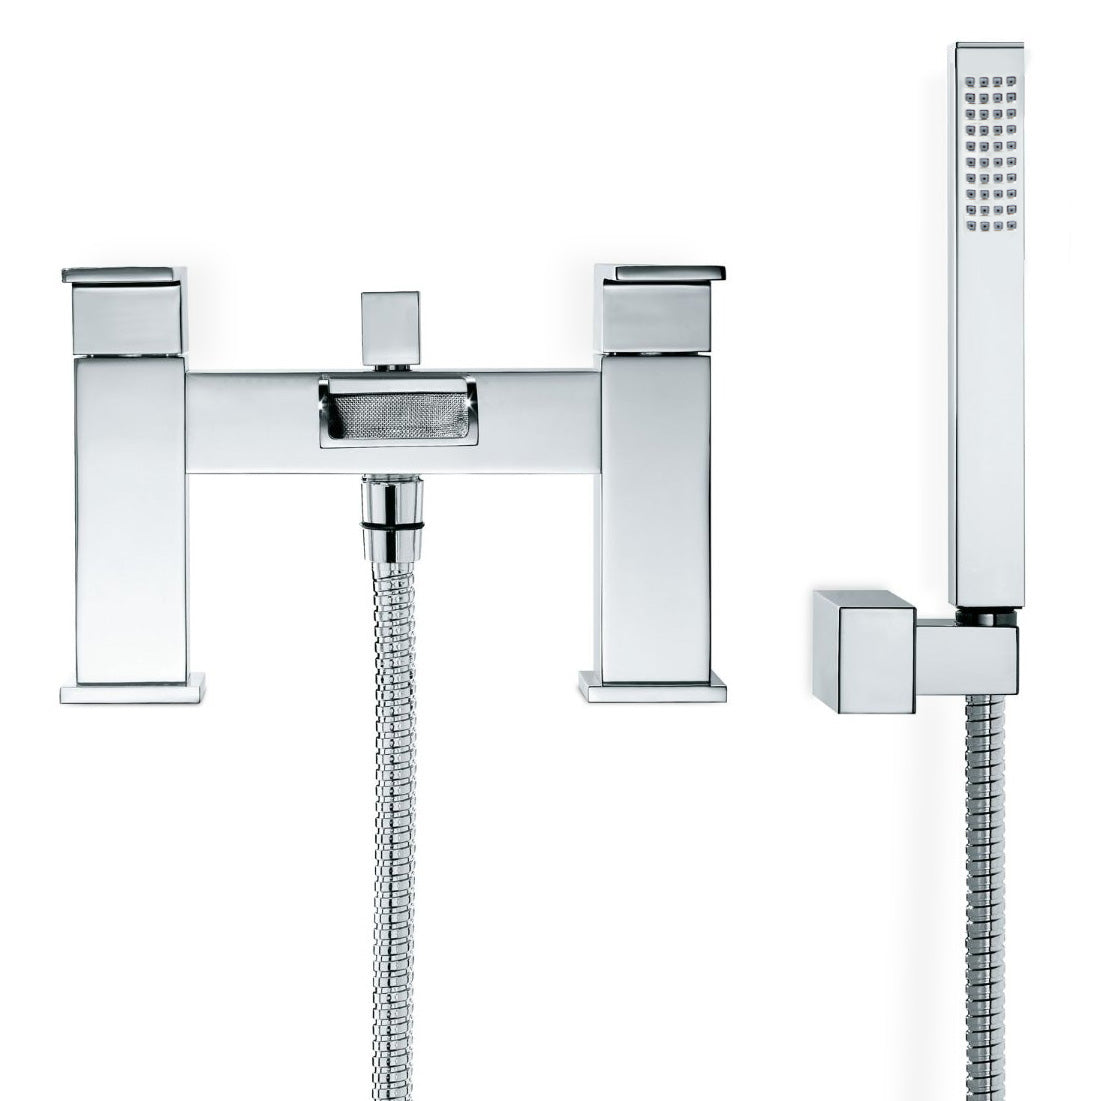 Ozone Waterfall Chrome Bath Shower Mixer Tap with Handset Kit